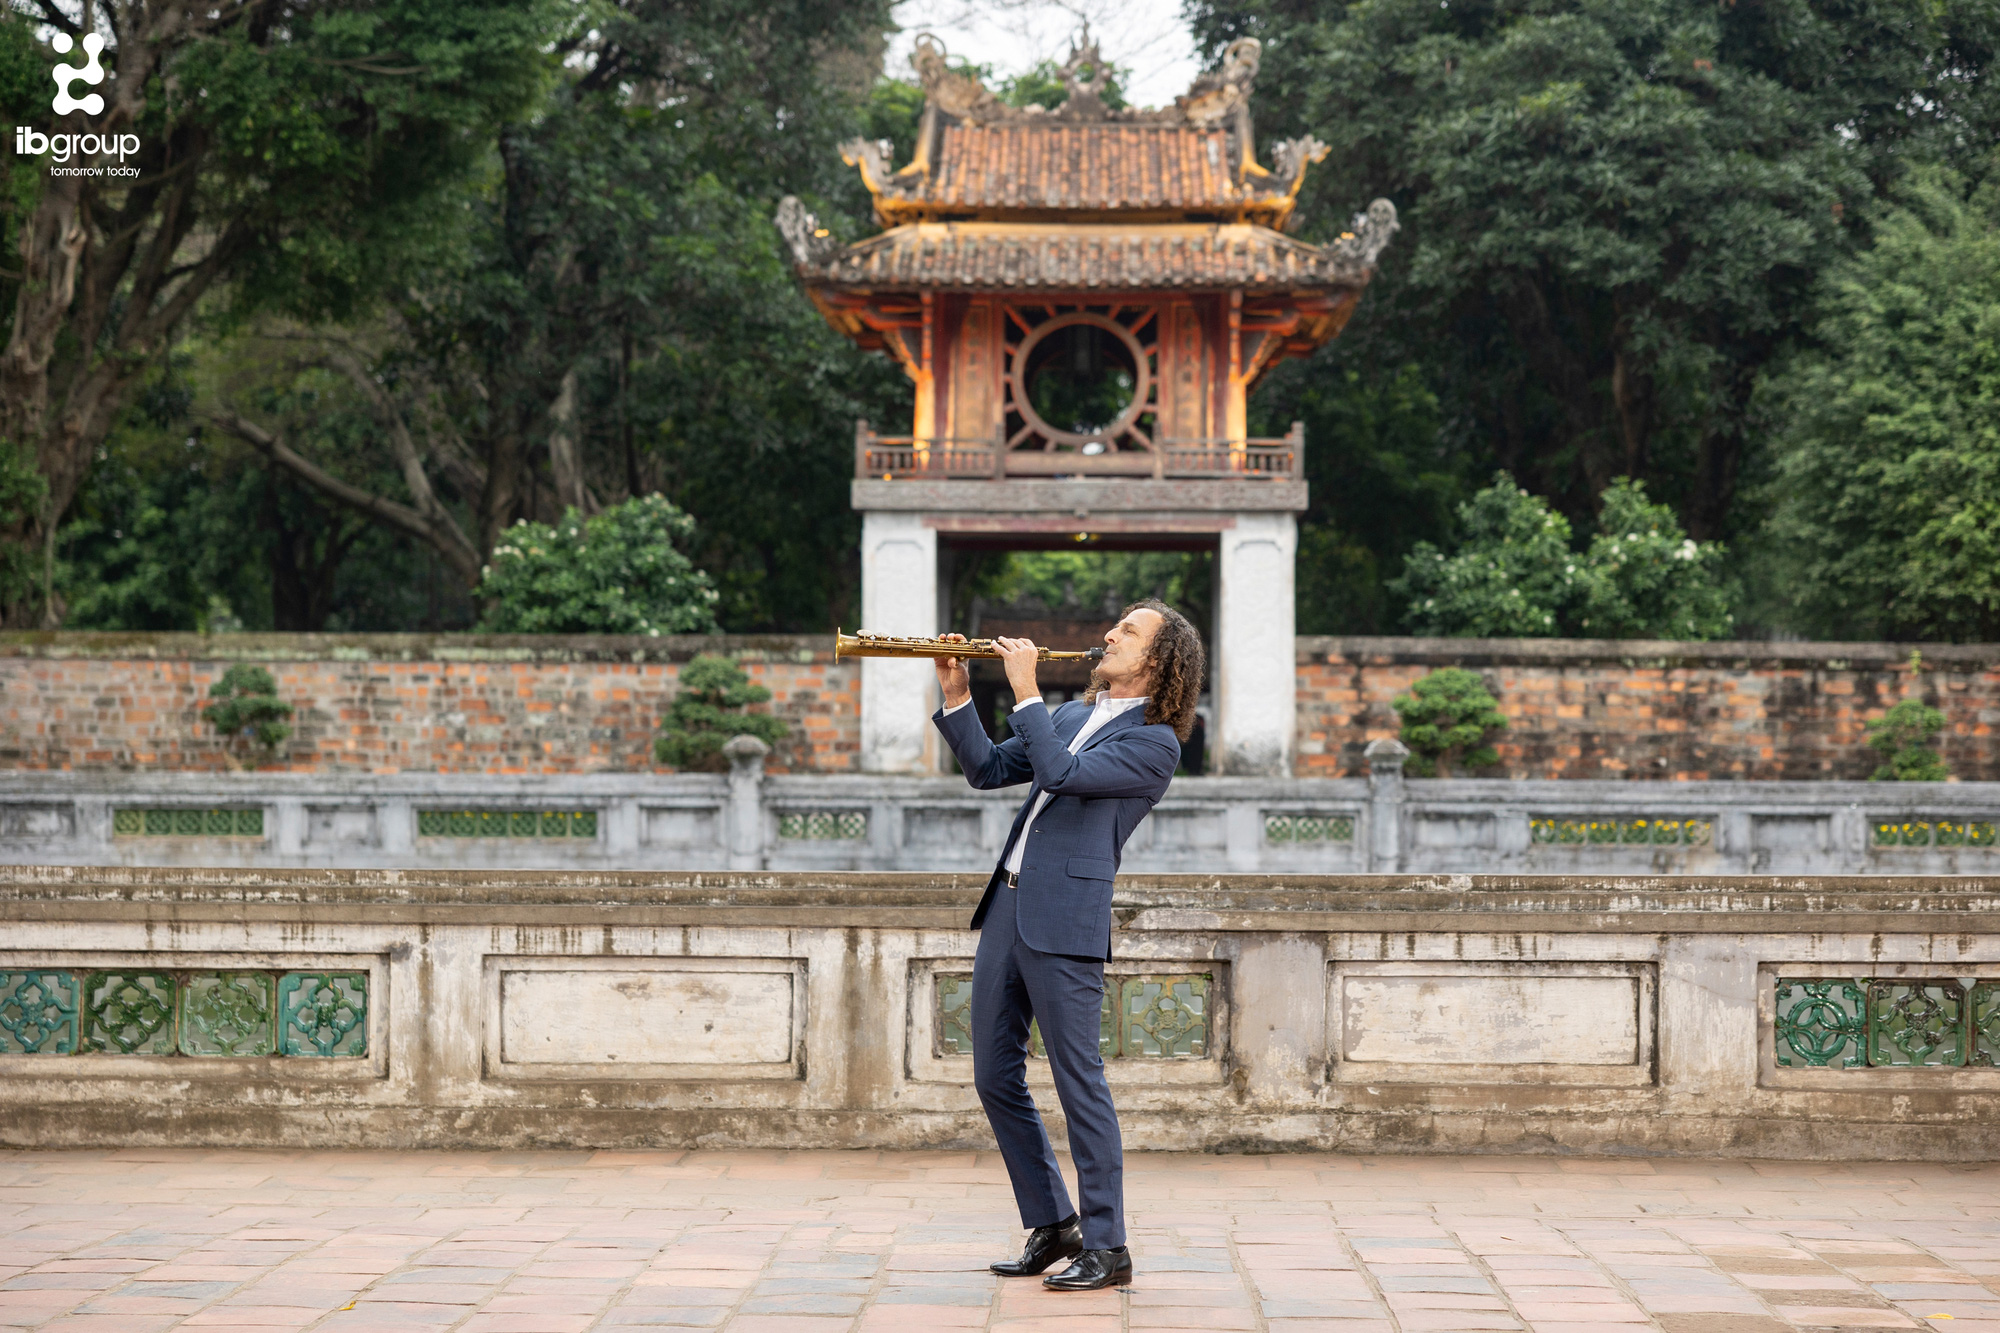 US saxophonist Kenny G’s only ‘Going Home’ music video promotes Hanoi's heritage sites